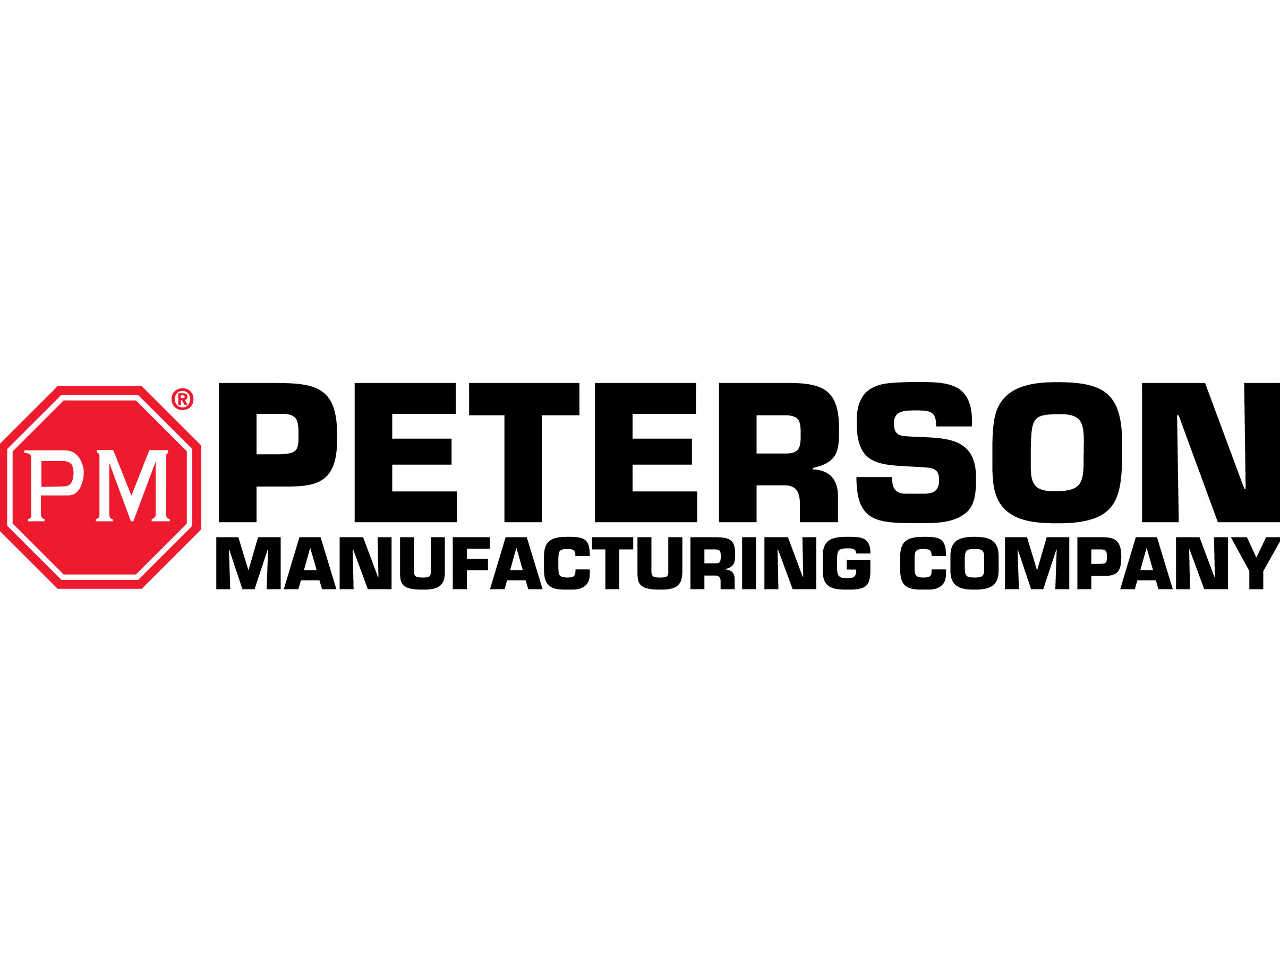 Peterson Manufacturing Company